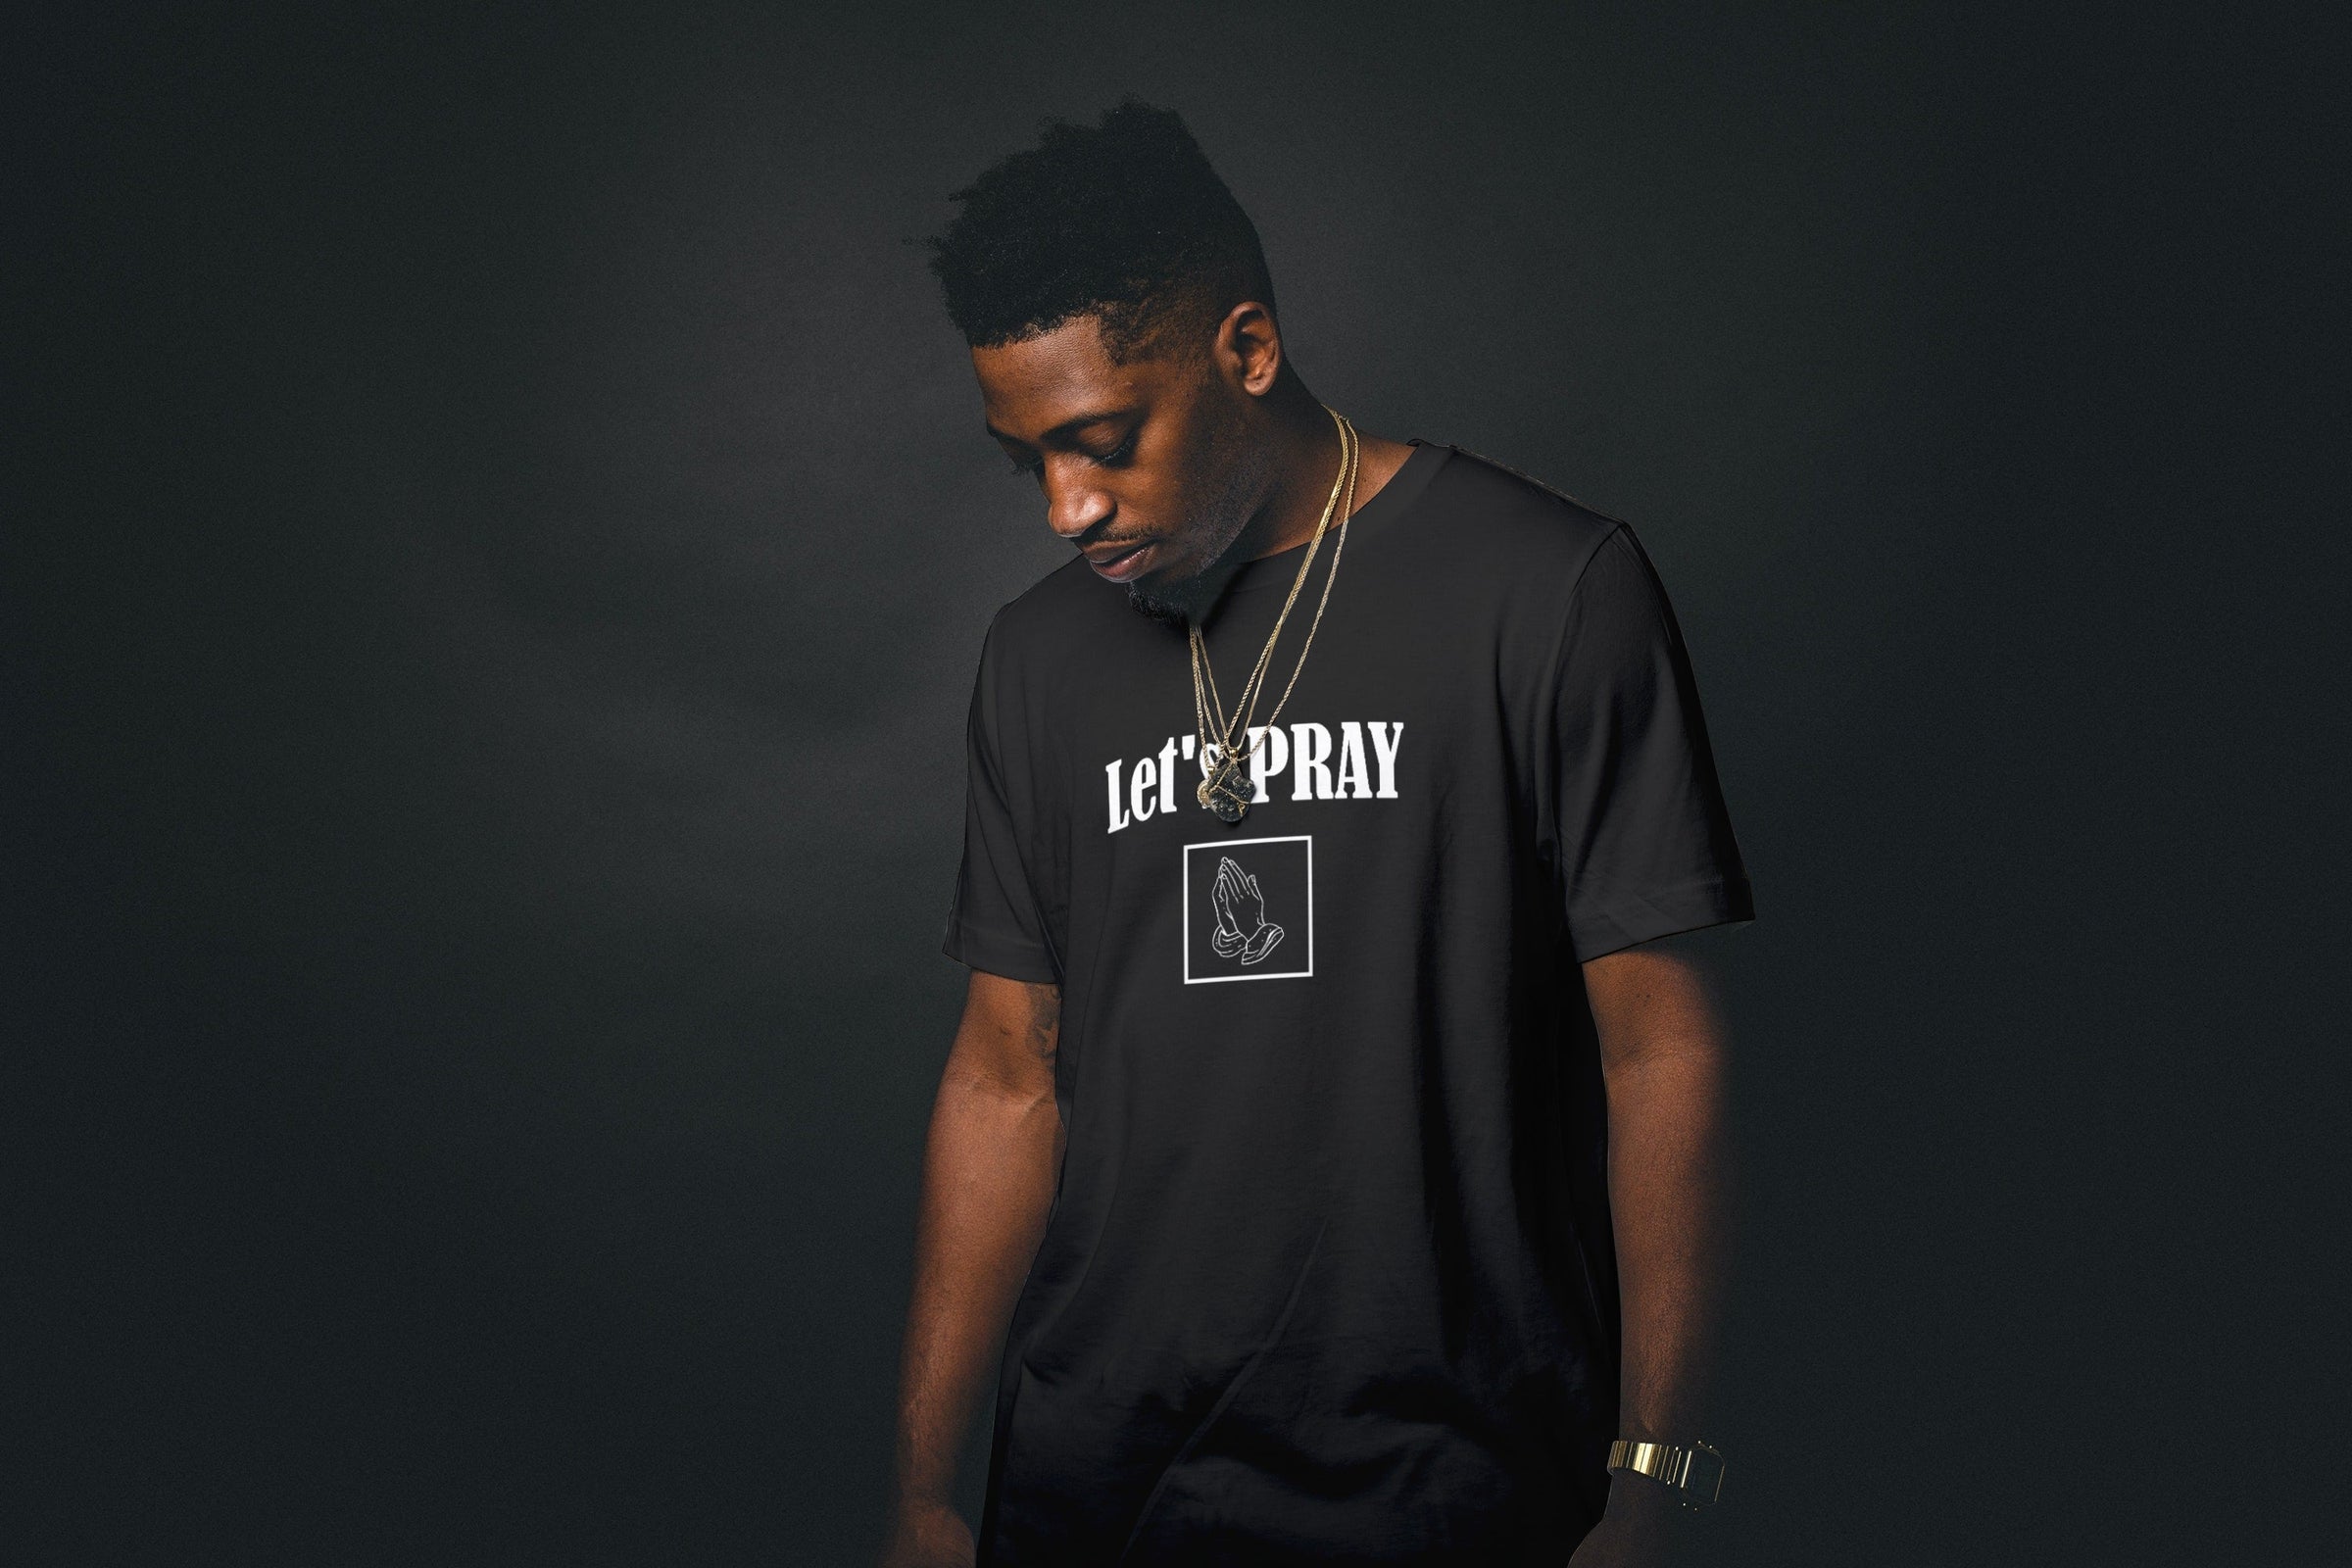 Man in black cotton t-shirt with Let's Pray message. Perfect christian tee and image of praying hands. T-shirt in color black.